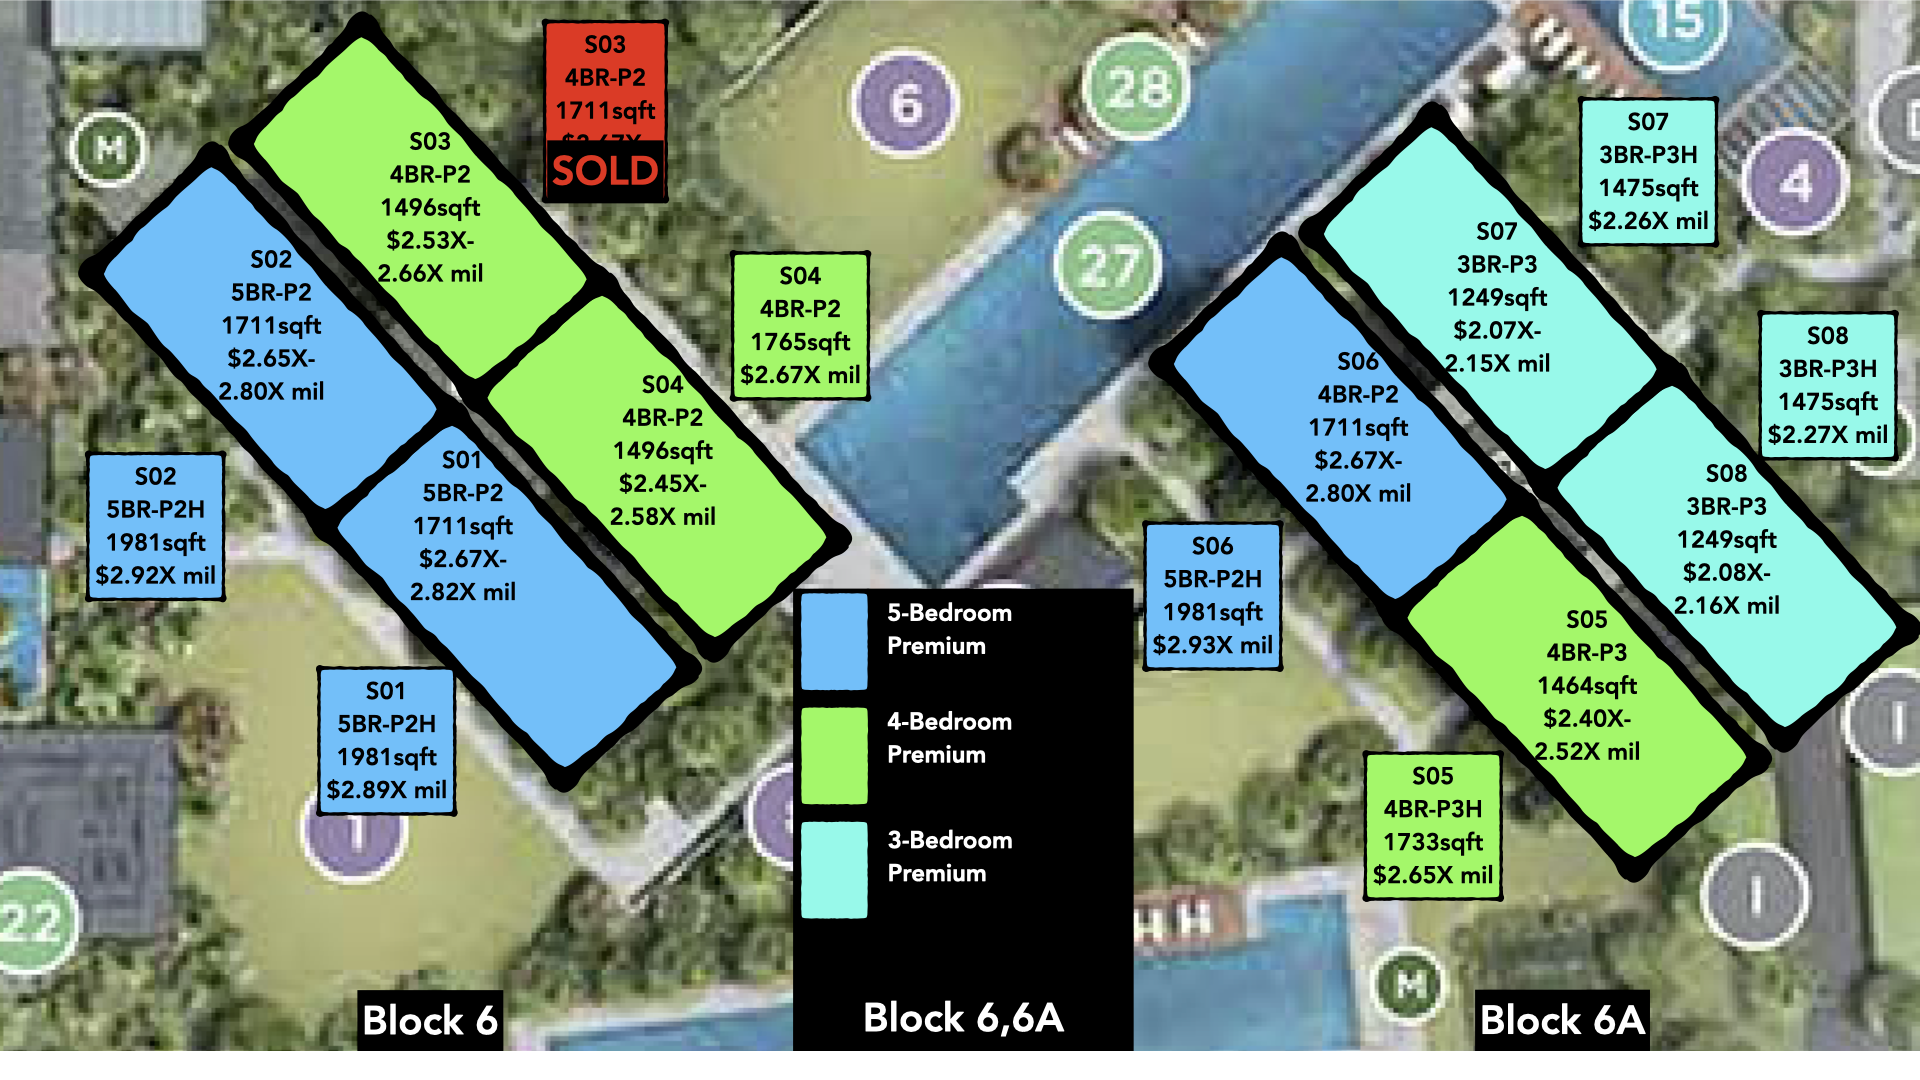 Parc Clematis Price Distribution Site Plan Block 6,6A PropertyLimBrothers.png